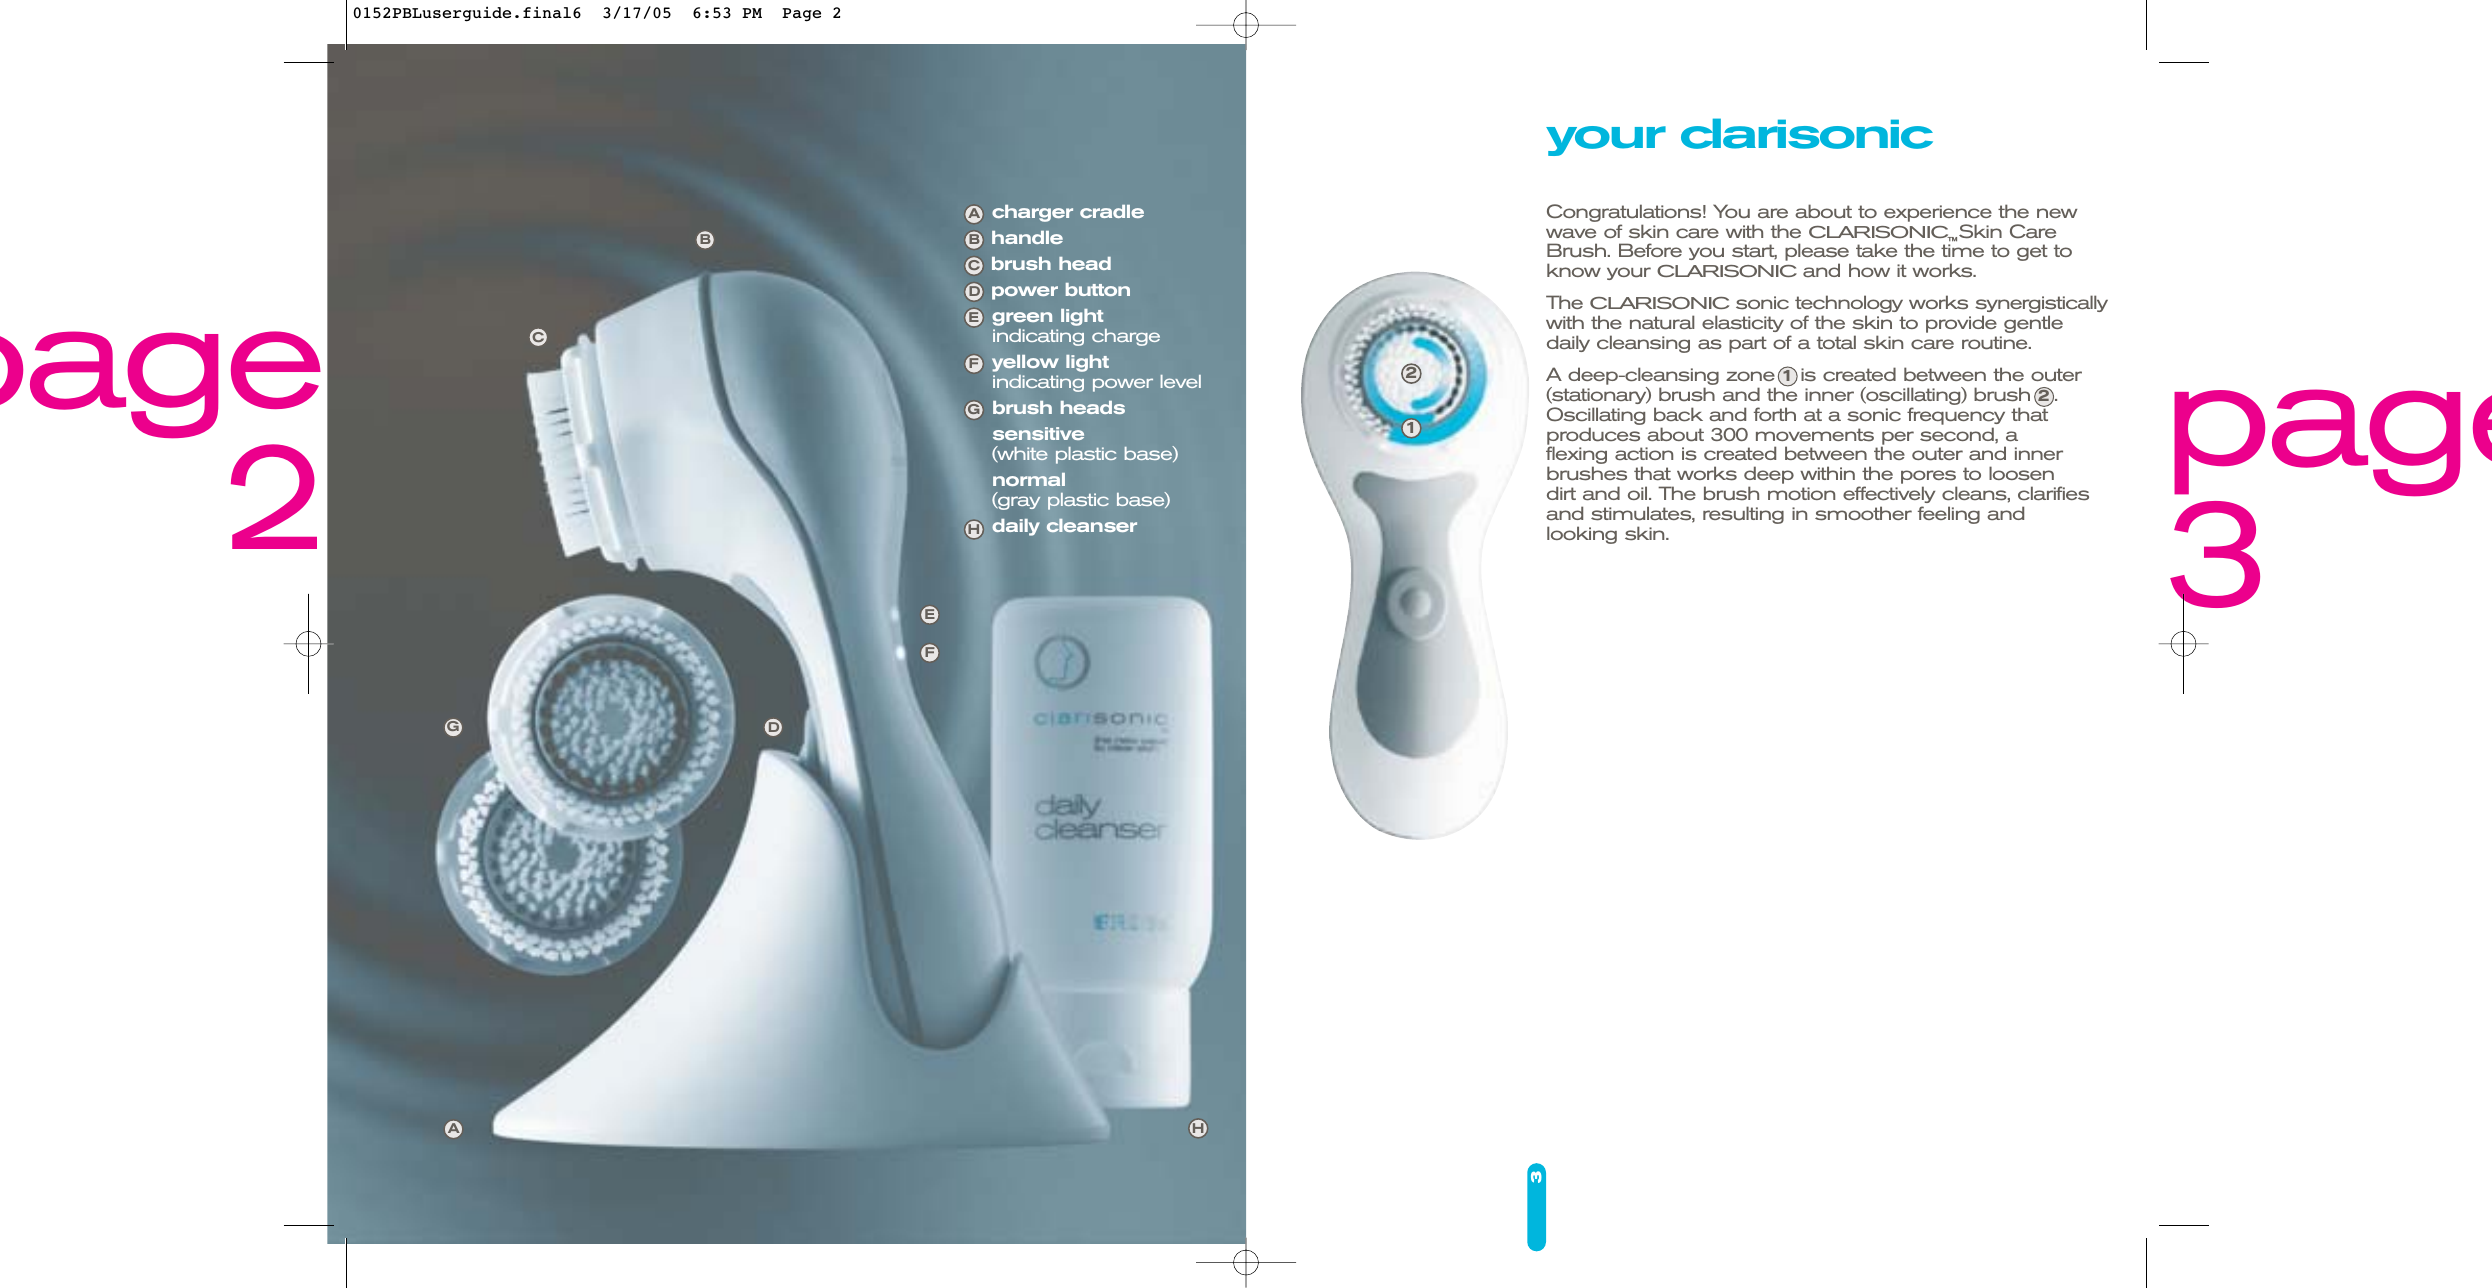 3charger cradlehandlebrush headpower buttongreen lightindicating chargeyellow light indicating power levelbrush headssensitive(white plastic base)normal(gray plastic base)daily cleanserEFDAGCBHABCDEFGH21page3page2your clarisonicCongratulations! You are about to experience the new wave of skin care with the CLARISONIC™Skin CareBrush. Before you start, please take the time to get toknow your CLARISONICand how it works. The CLARISONICsonic technology works synergisticallywith the natural elasticity of the skin to provide gentledaily cleansing as part of a total skin care routine. A deep-cleansing zone 1is created between the outer (stationary) brush and the inner (oscillating) brush 2.Oscillating back and forth at a sonic frequency that produces about 300 movements per second, a flexing action is created between the outer and innerbrushes that works deep within the pores to loosen dirt and oil. The brush motion effectively cleans, clarifiesand stimulates, resulting in smoother feeling and looking skin.0152PBLuserguide.final6  3/17/05  6:53 PM  Page 2